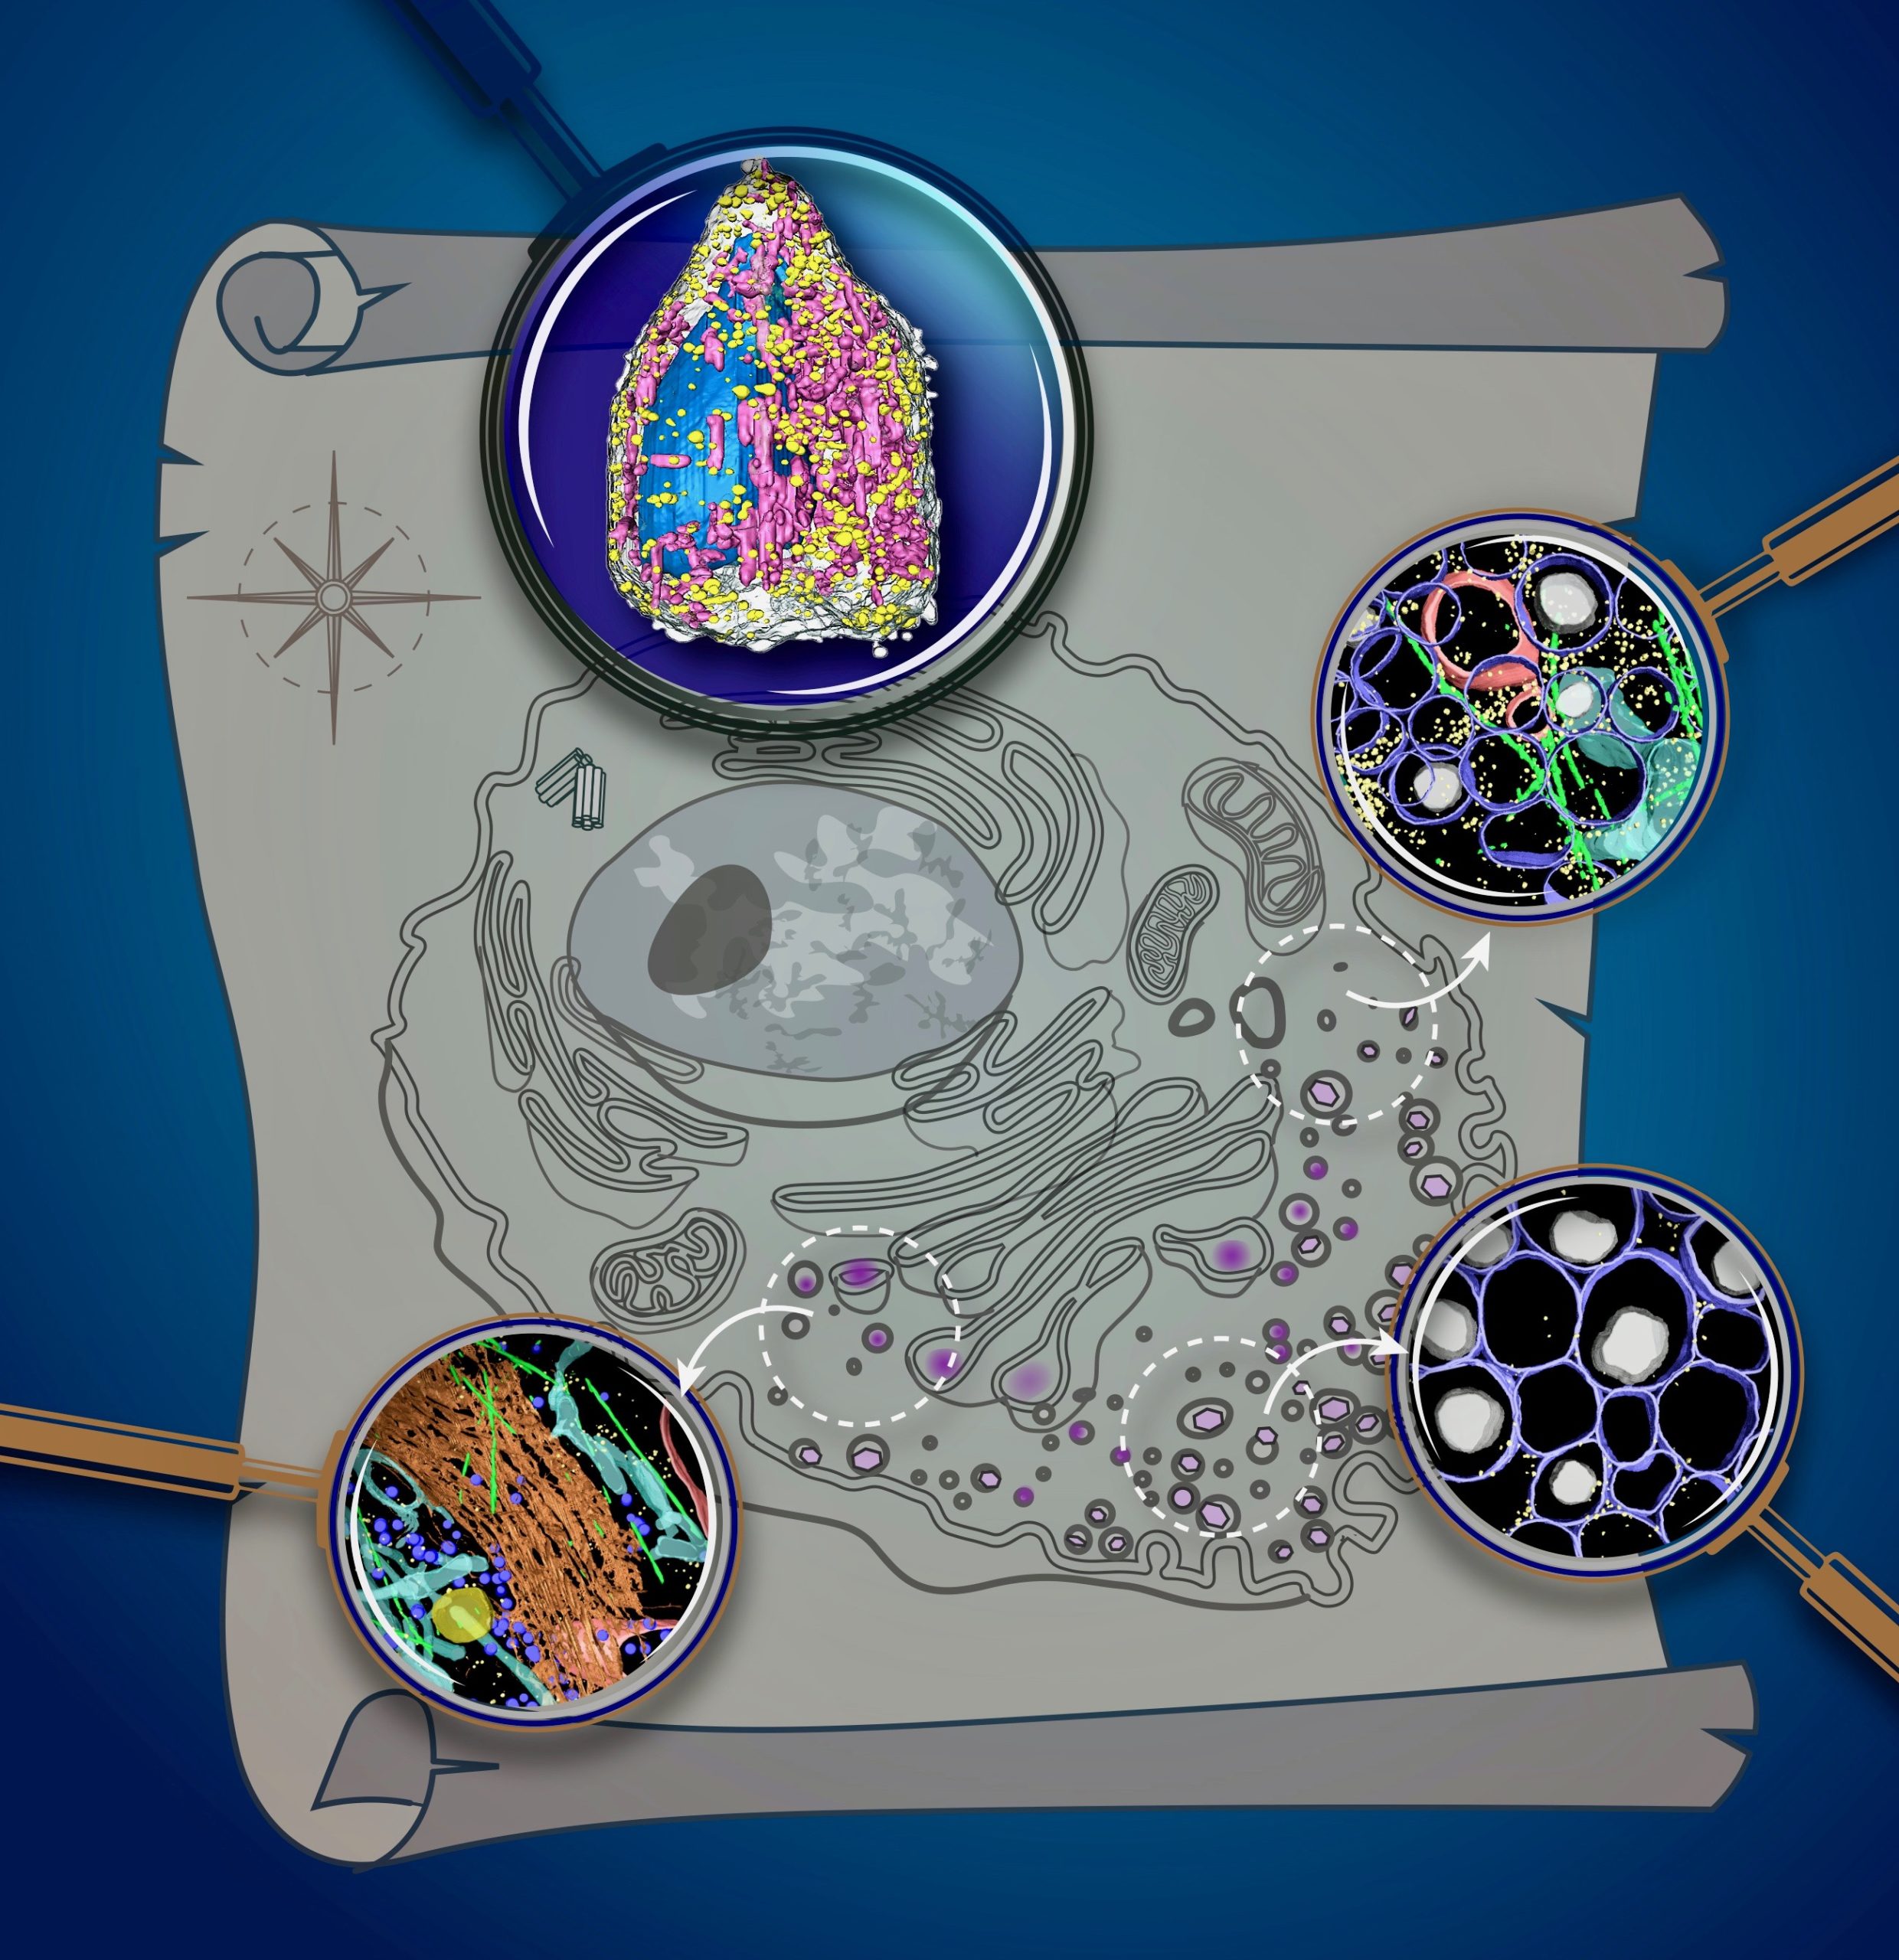 An illustration showing how X-ray tomography can reveal details about the inner workings of intact cells